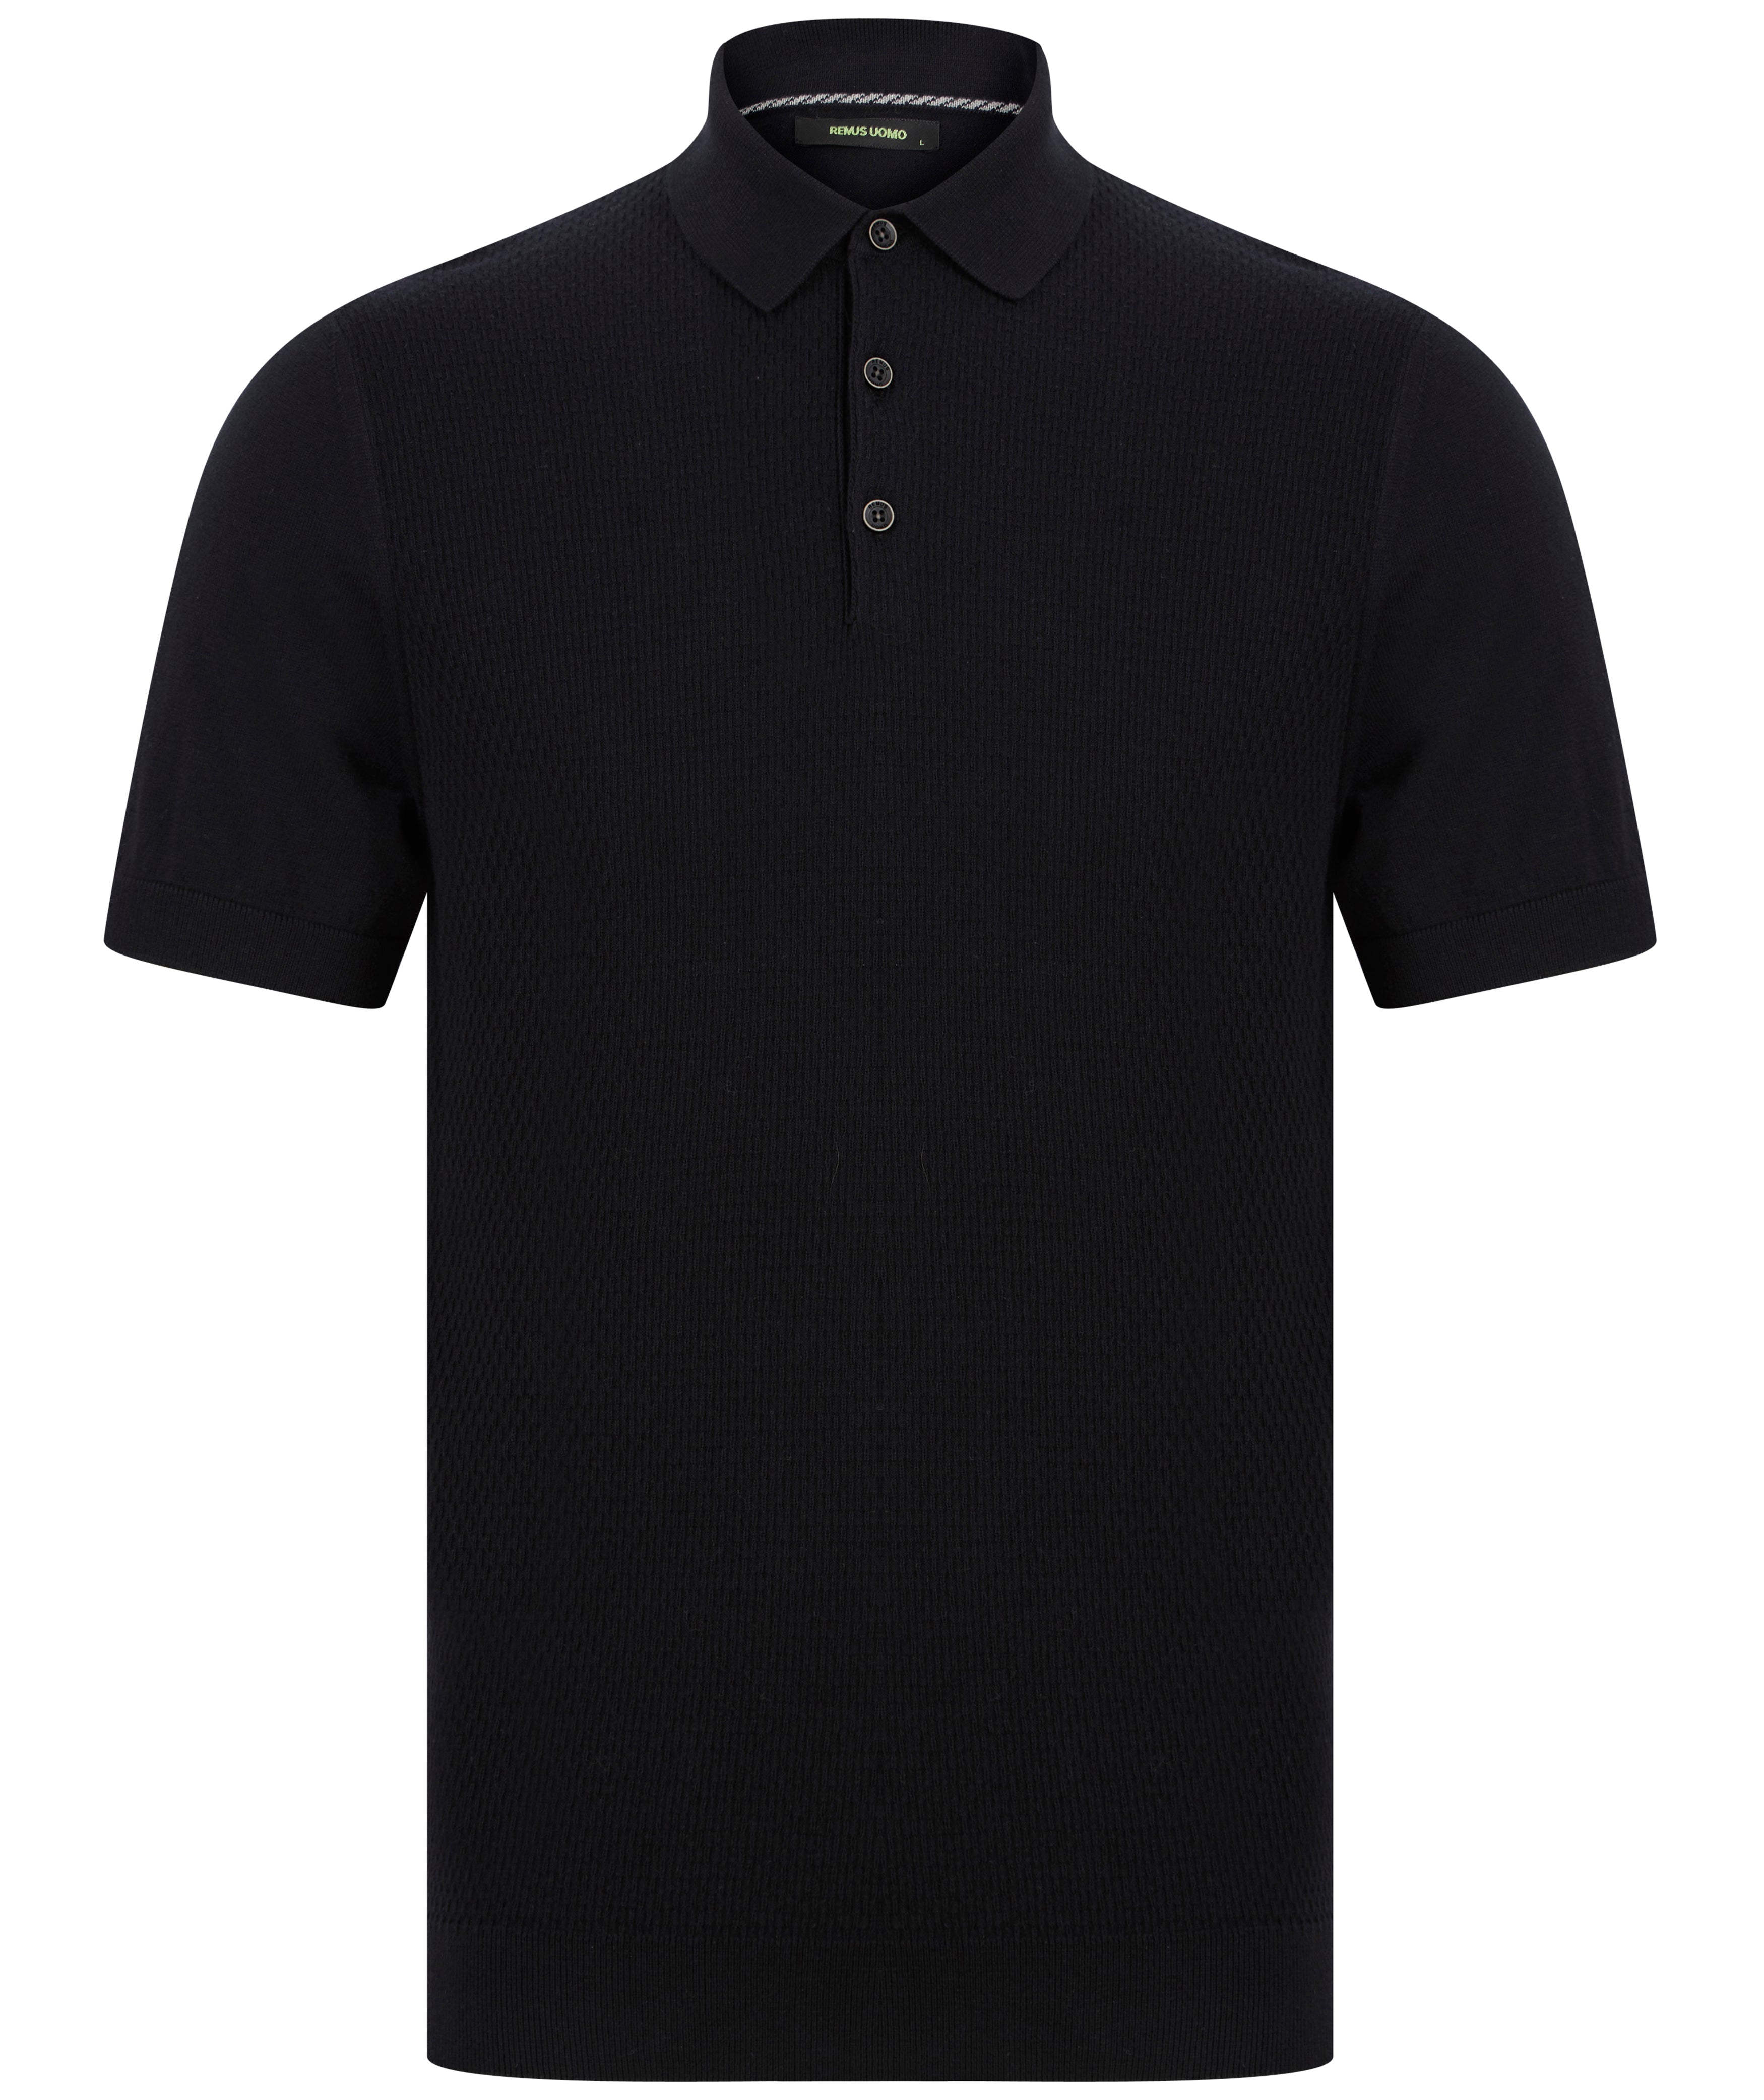 Load image into Gallery viewer, Remus Slim Fit Knit Polo Black
